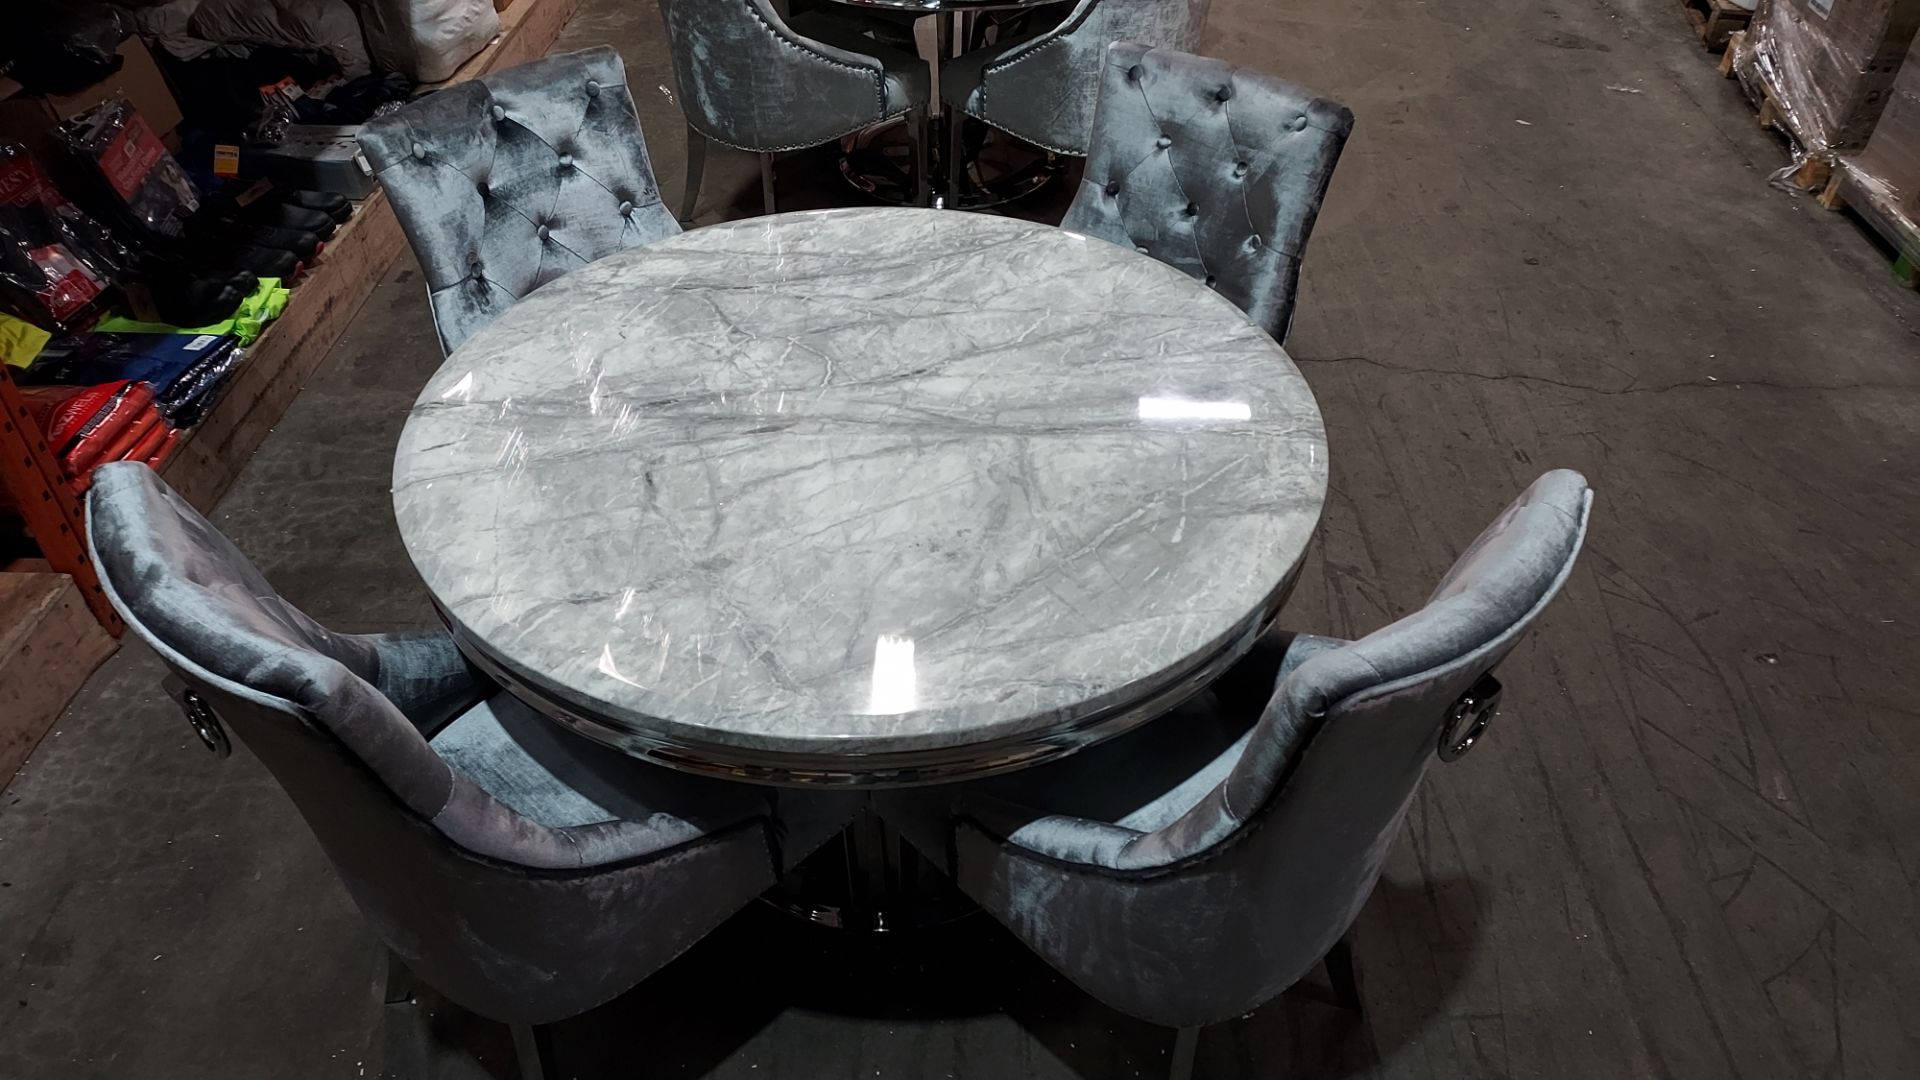 1 X ARTURO ROUND MARBLE TOP DINING TABLE WITH 4 SILVER VELVET BUTTONED BACK CHAIRS ( DIAMETER 130 CM